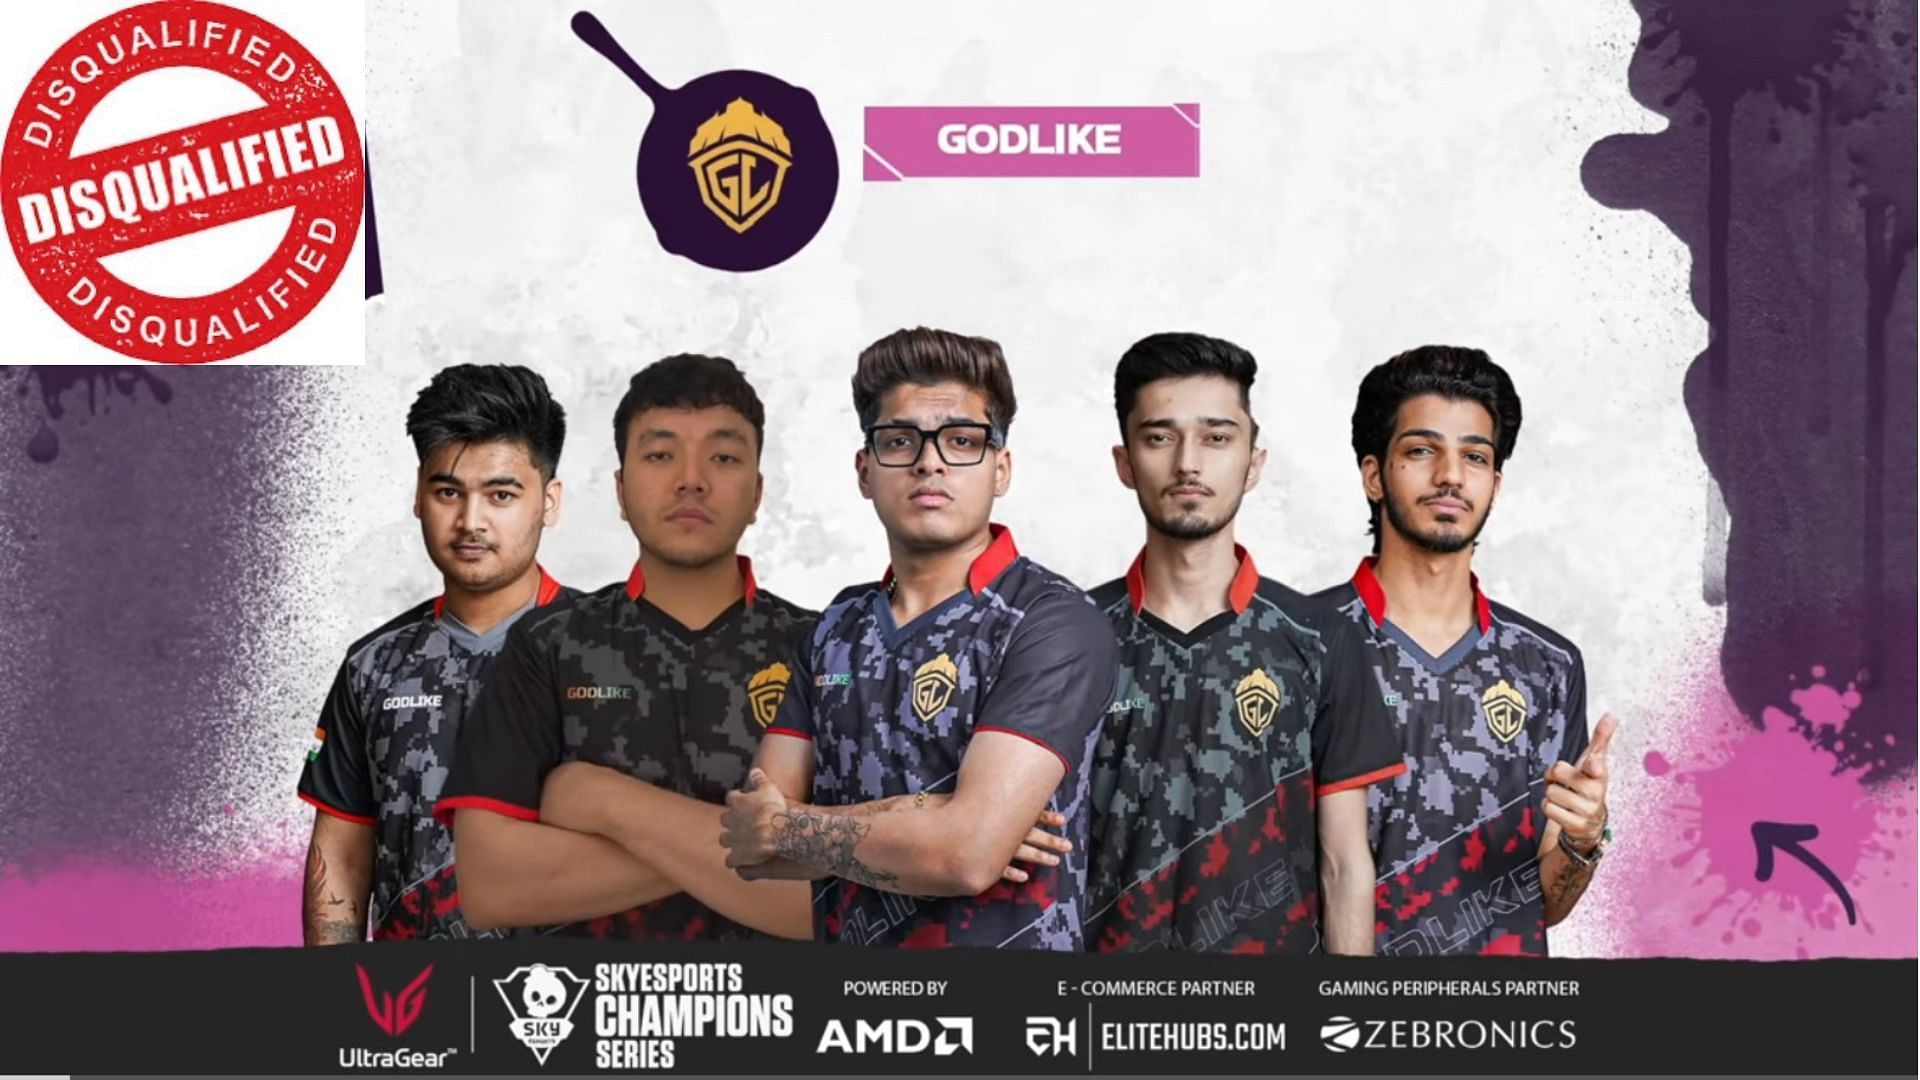 GodLike has been disqualified from Skyesports Champions Series 2024 (Image via Skyesports)